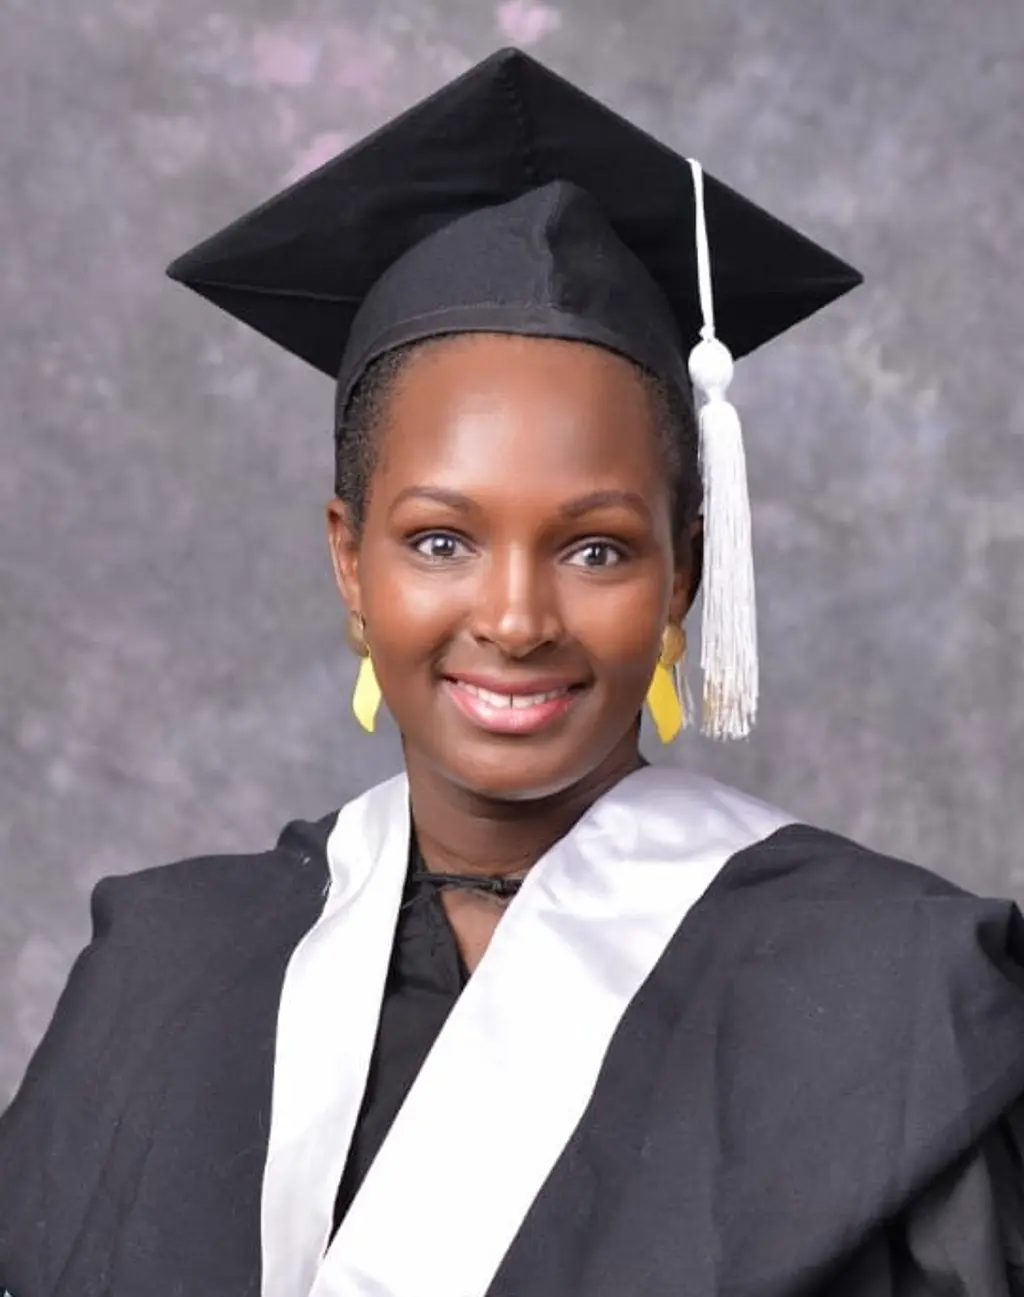 Mary Shompole, an RTI staff member based in Kenya, in a graduation cap and gown